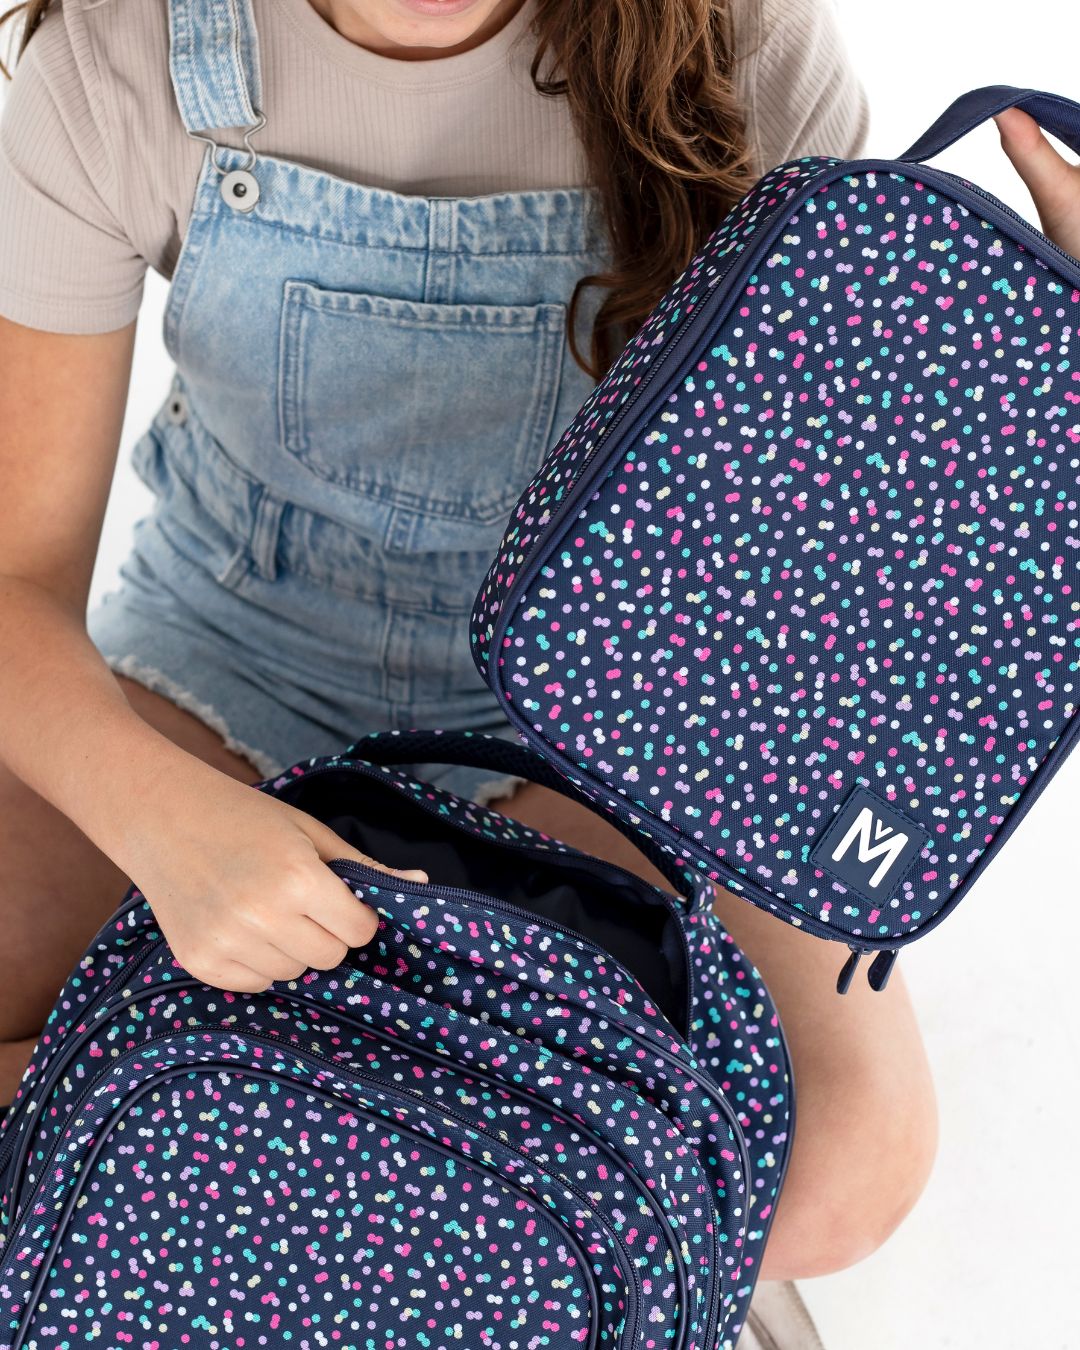 Montii Backpack Confetti